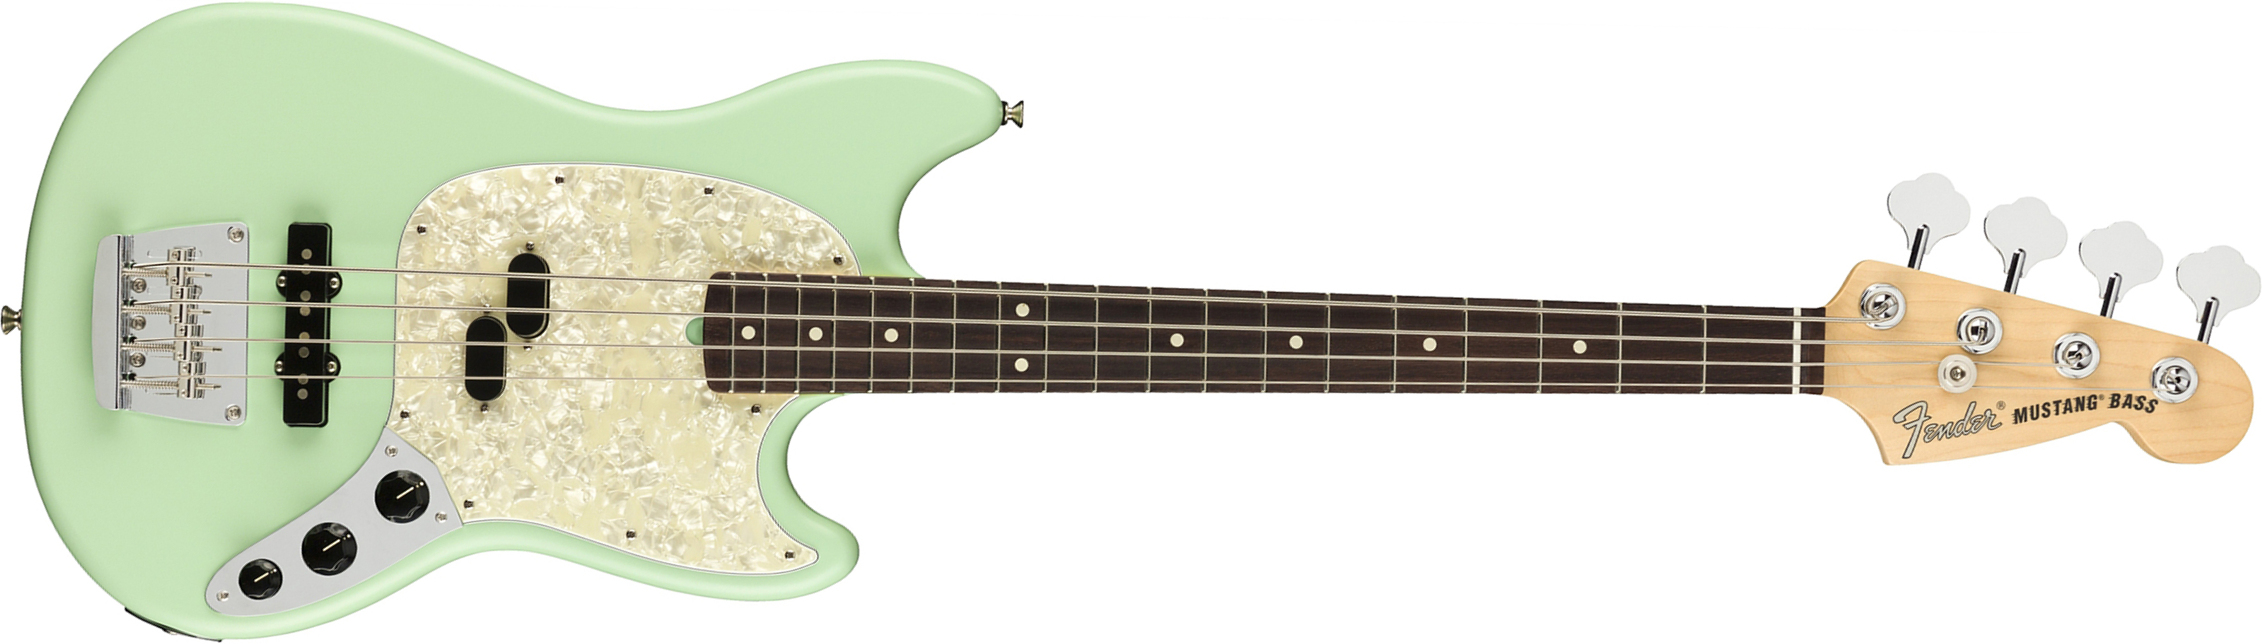 Fender Mustang Bass American Performer Usa Rw - Satin Surf Green - Electric bass for kids - Main picture